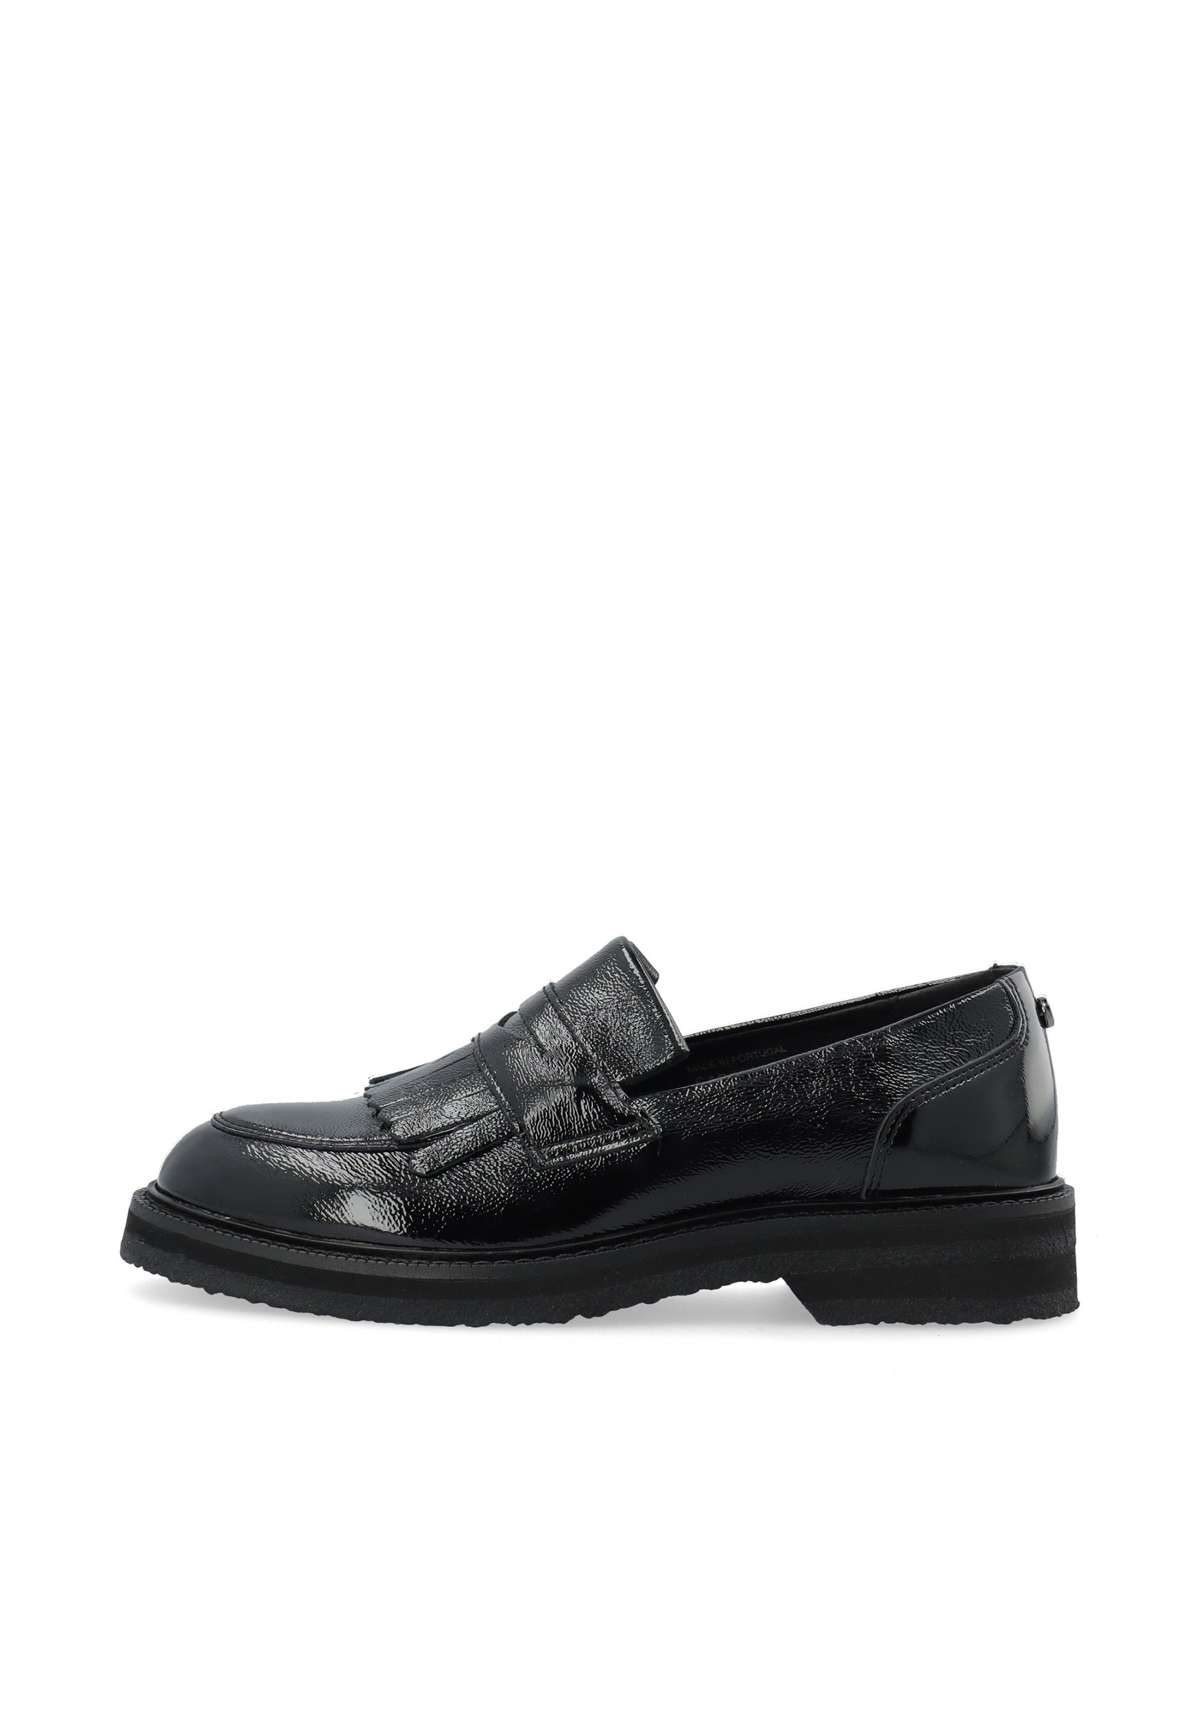 Ботинки CASBETTY LOAFER W. FRINGES PATENT